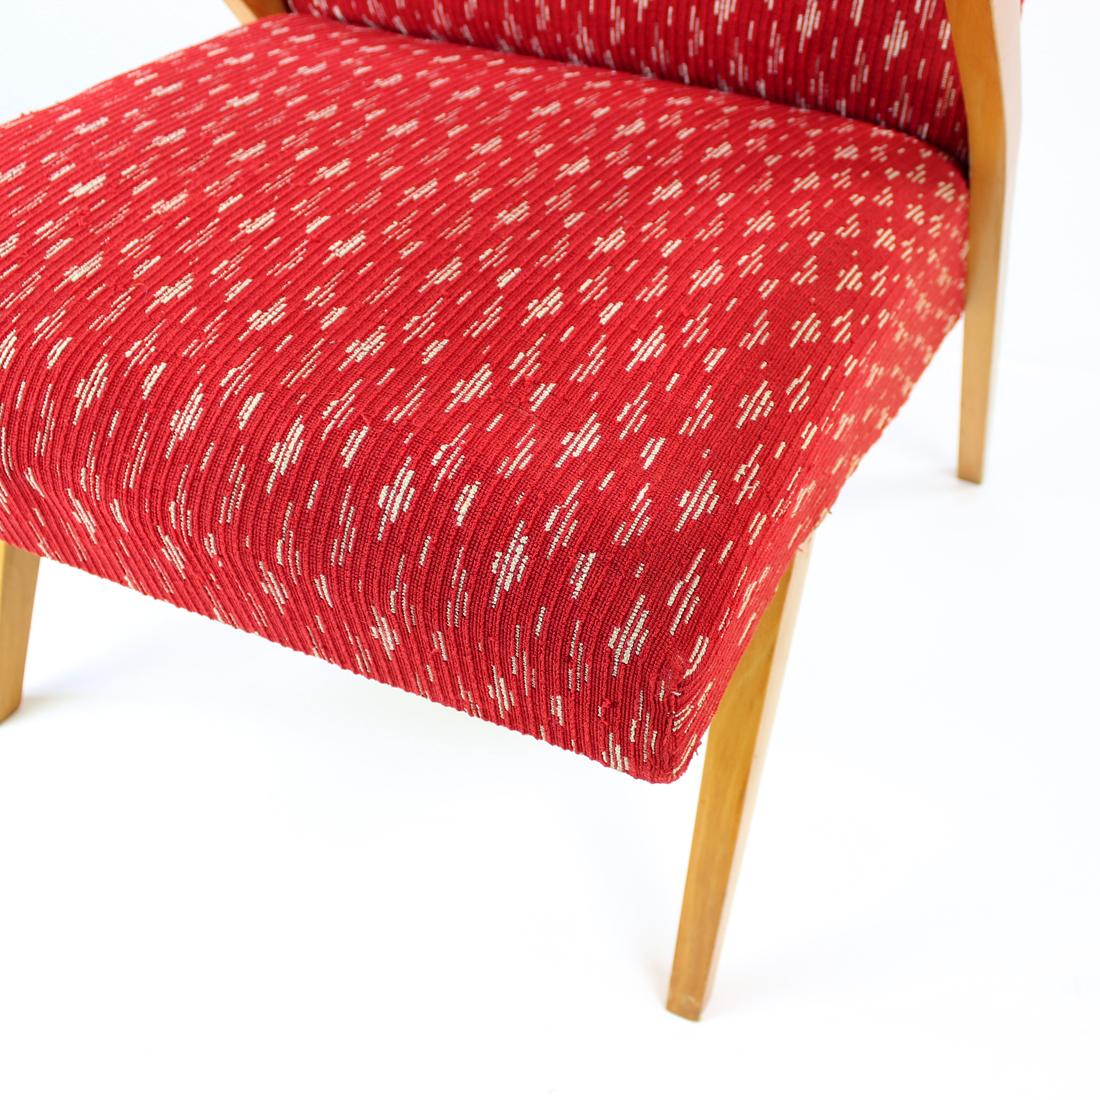 Midcentury Armchair in Original Red Fabric & Blonde Wood, Czechoslovakia, 1960s For Sale 4